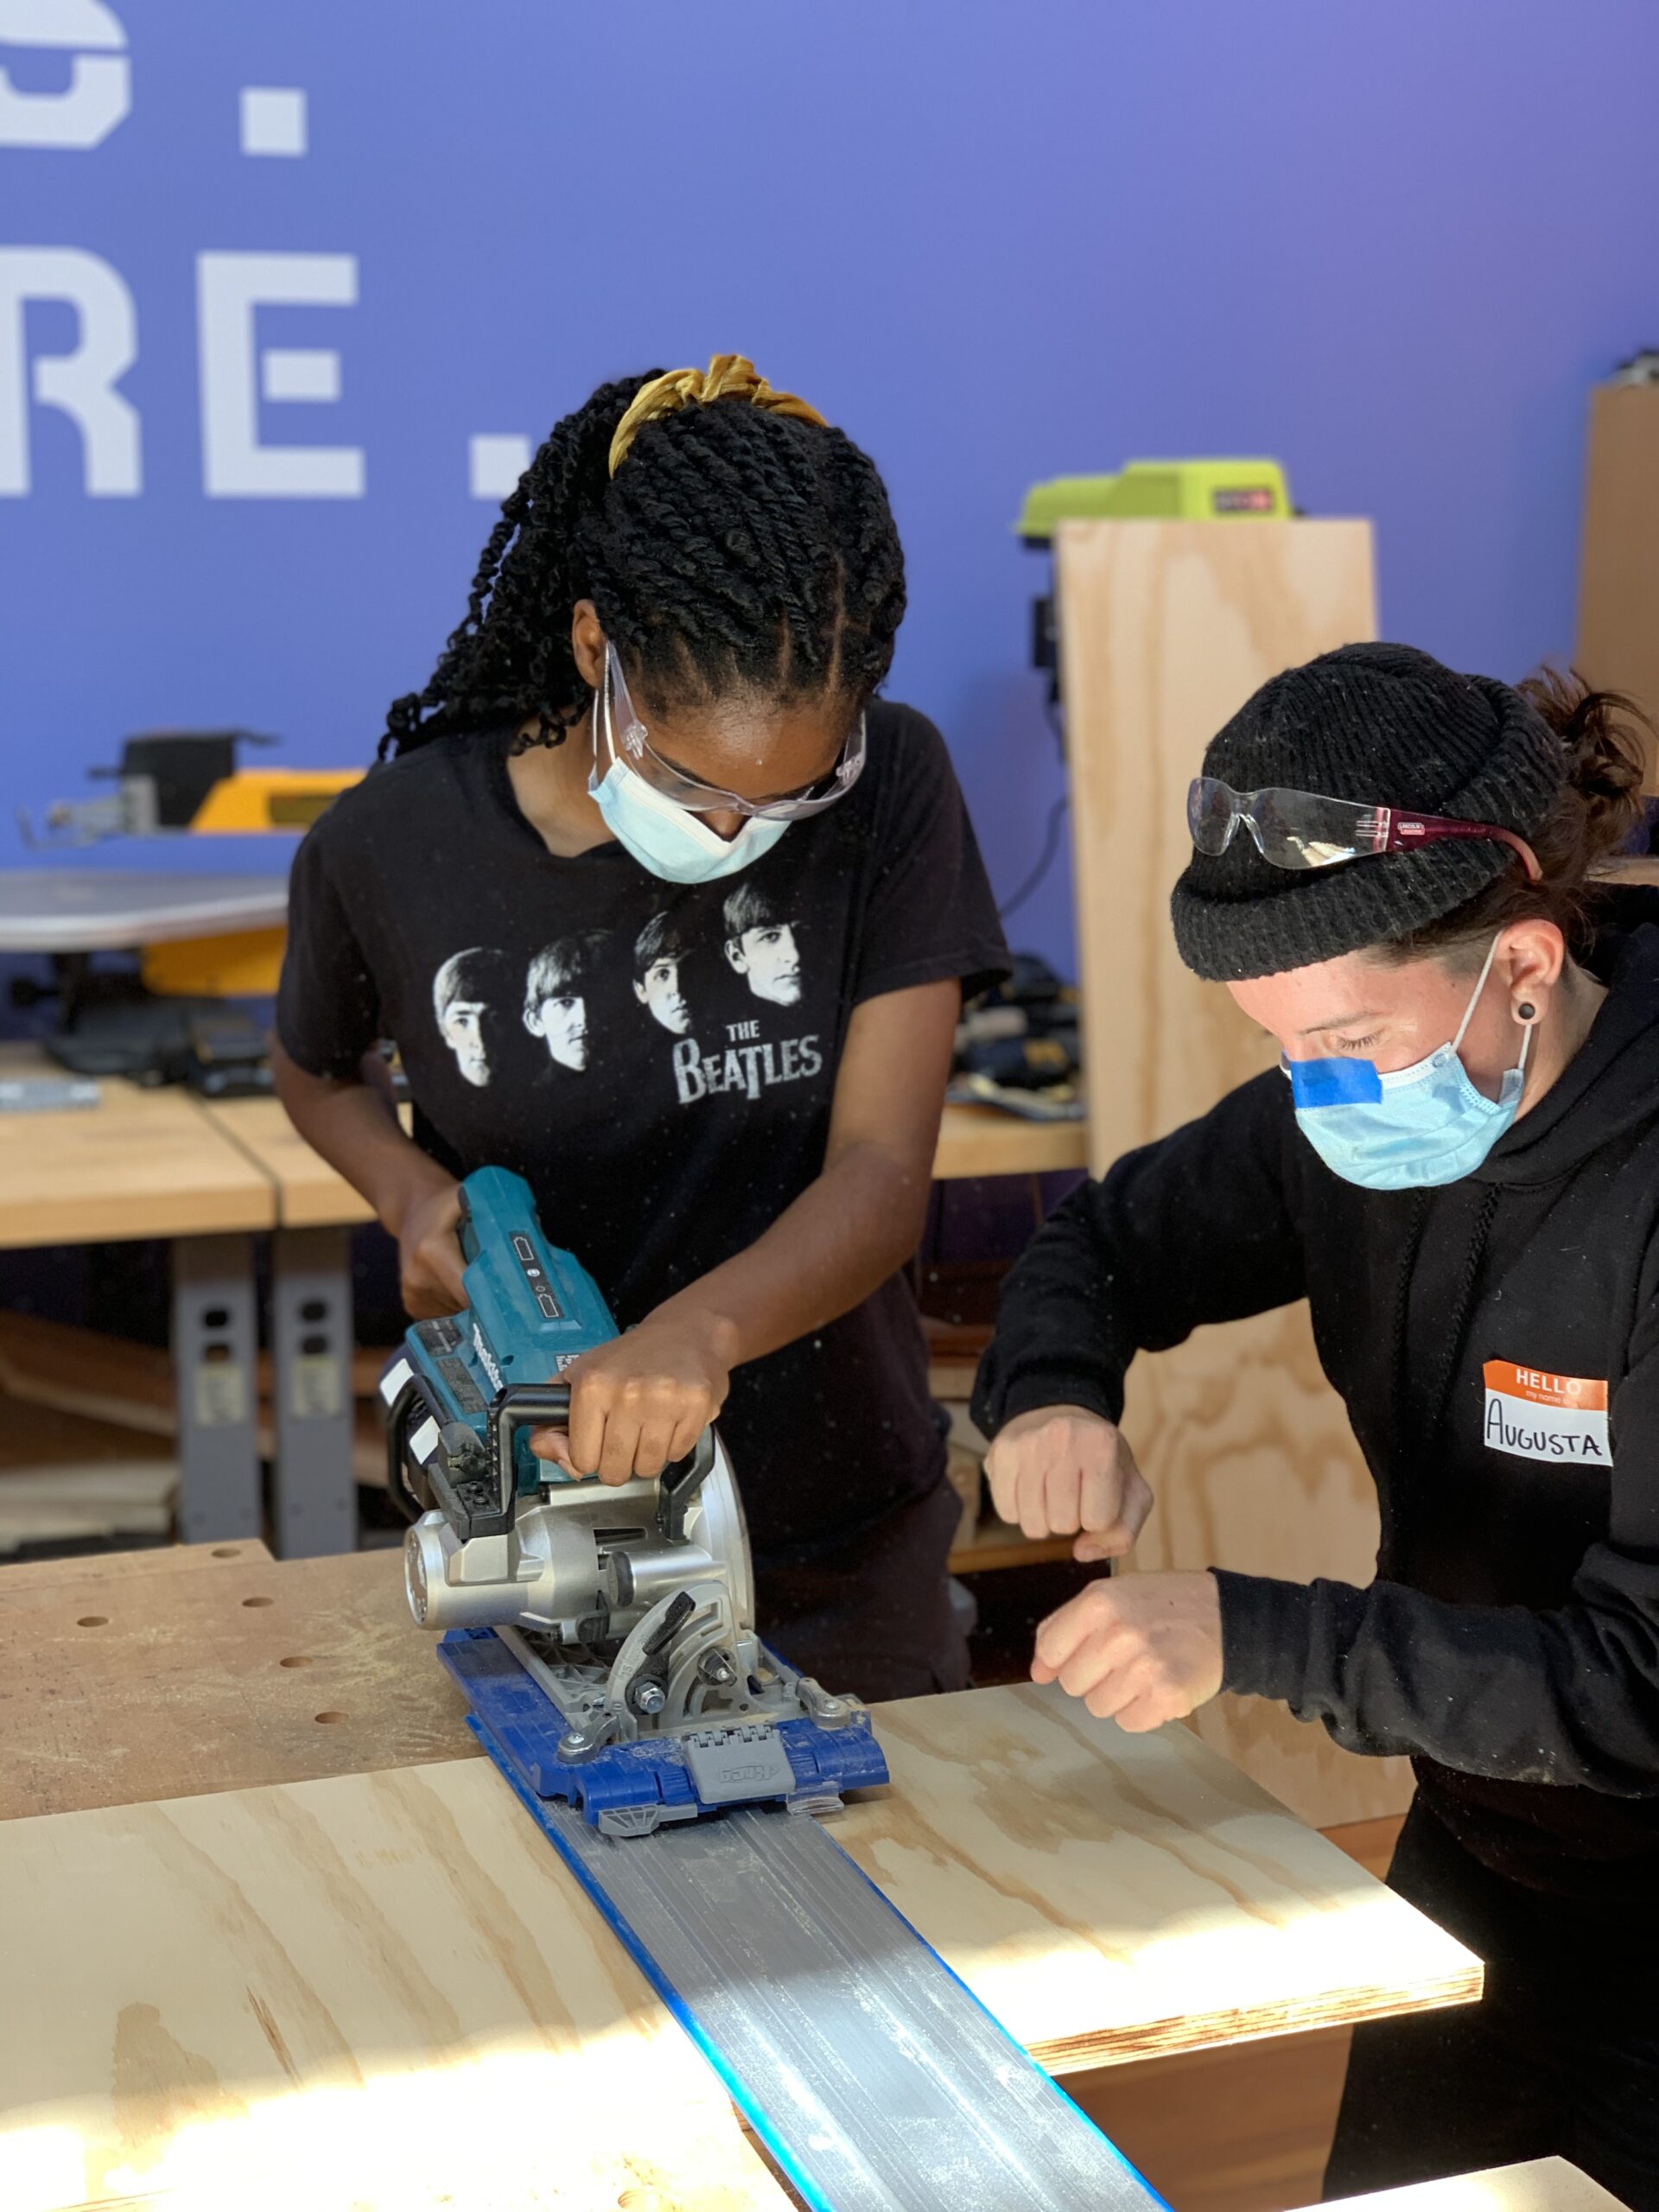 Augusta Sitney demonstrates how to use the circular saw at Girls Garage